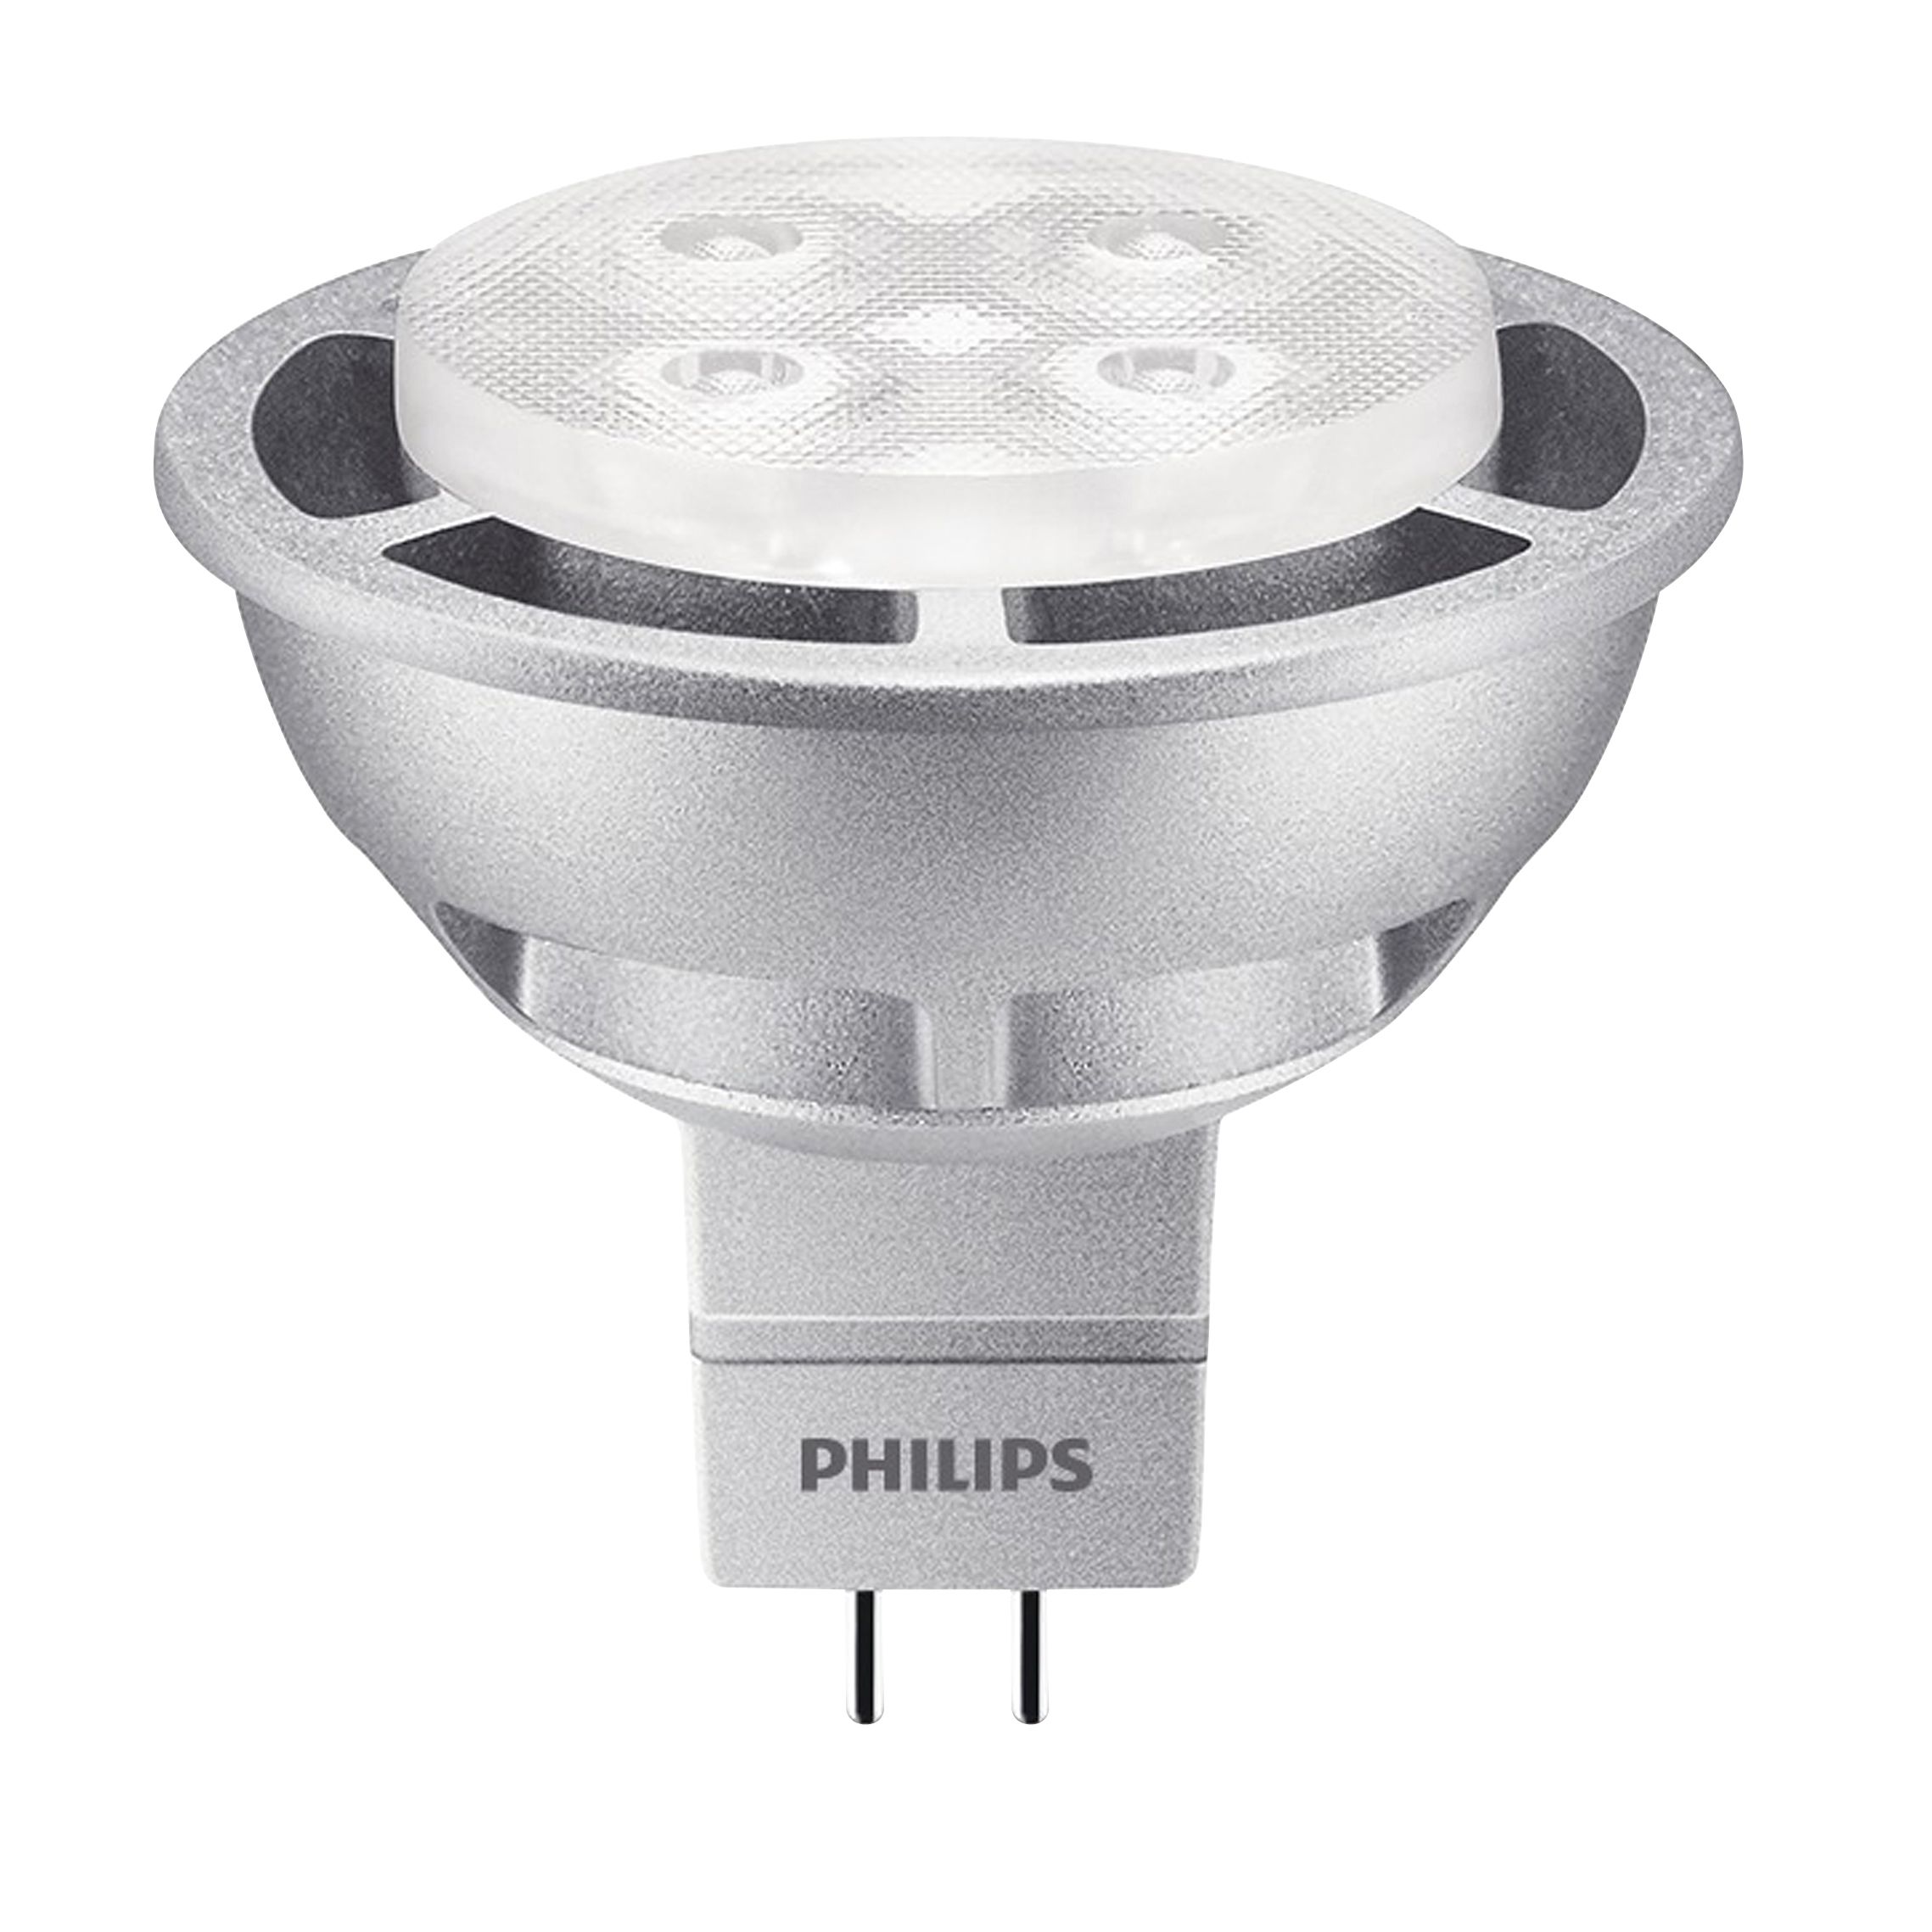 3-pack Bulb LED Dimmable 3,8W GU10 - Philips